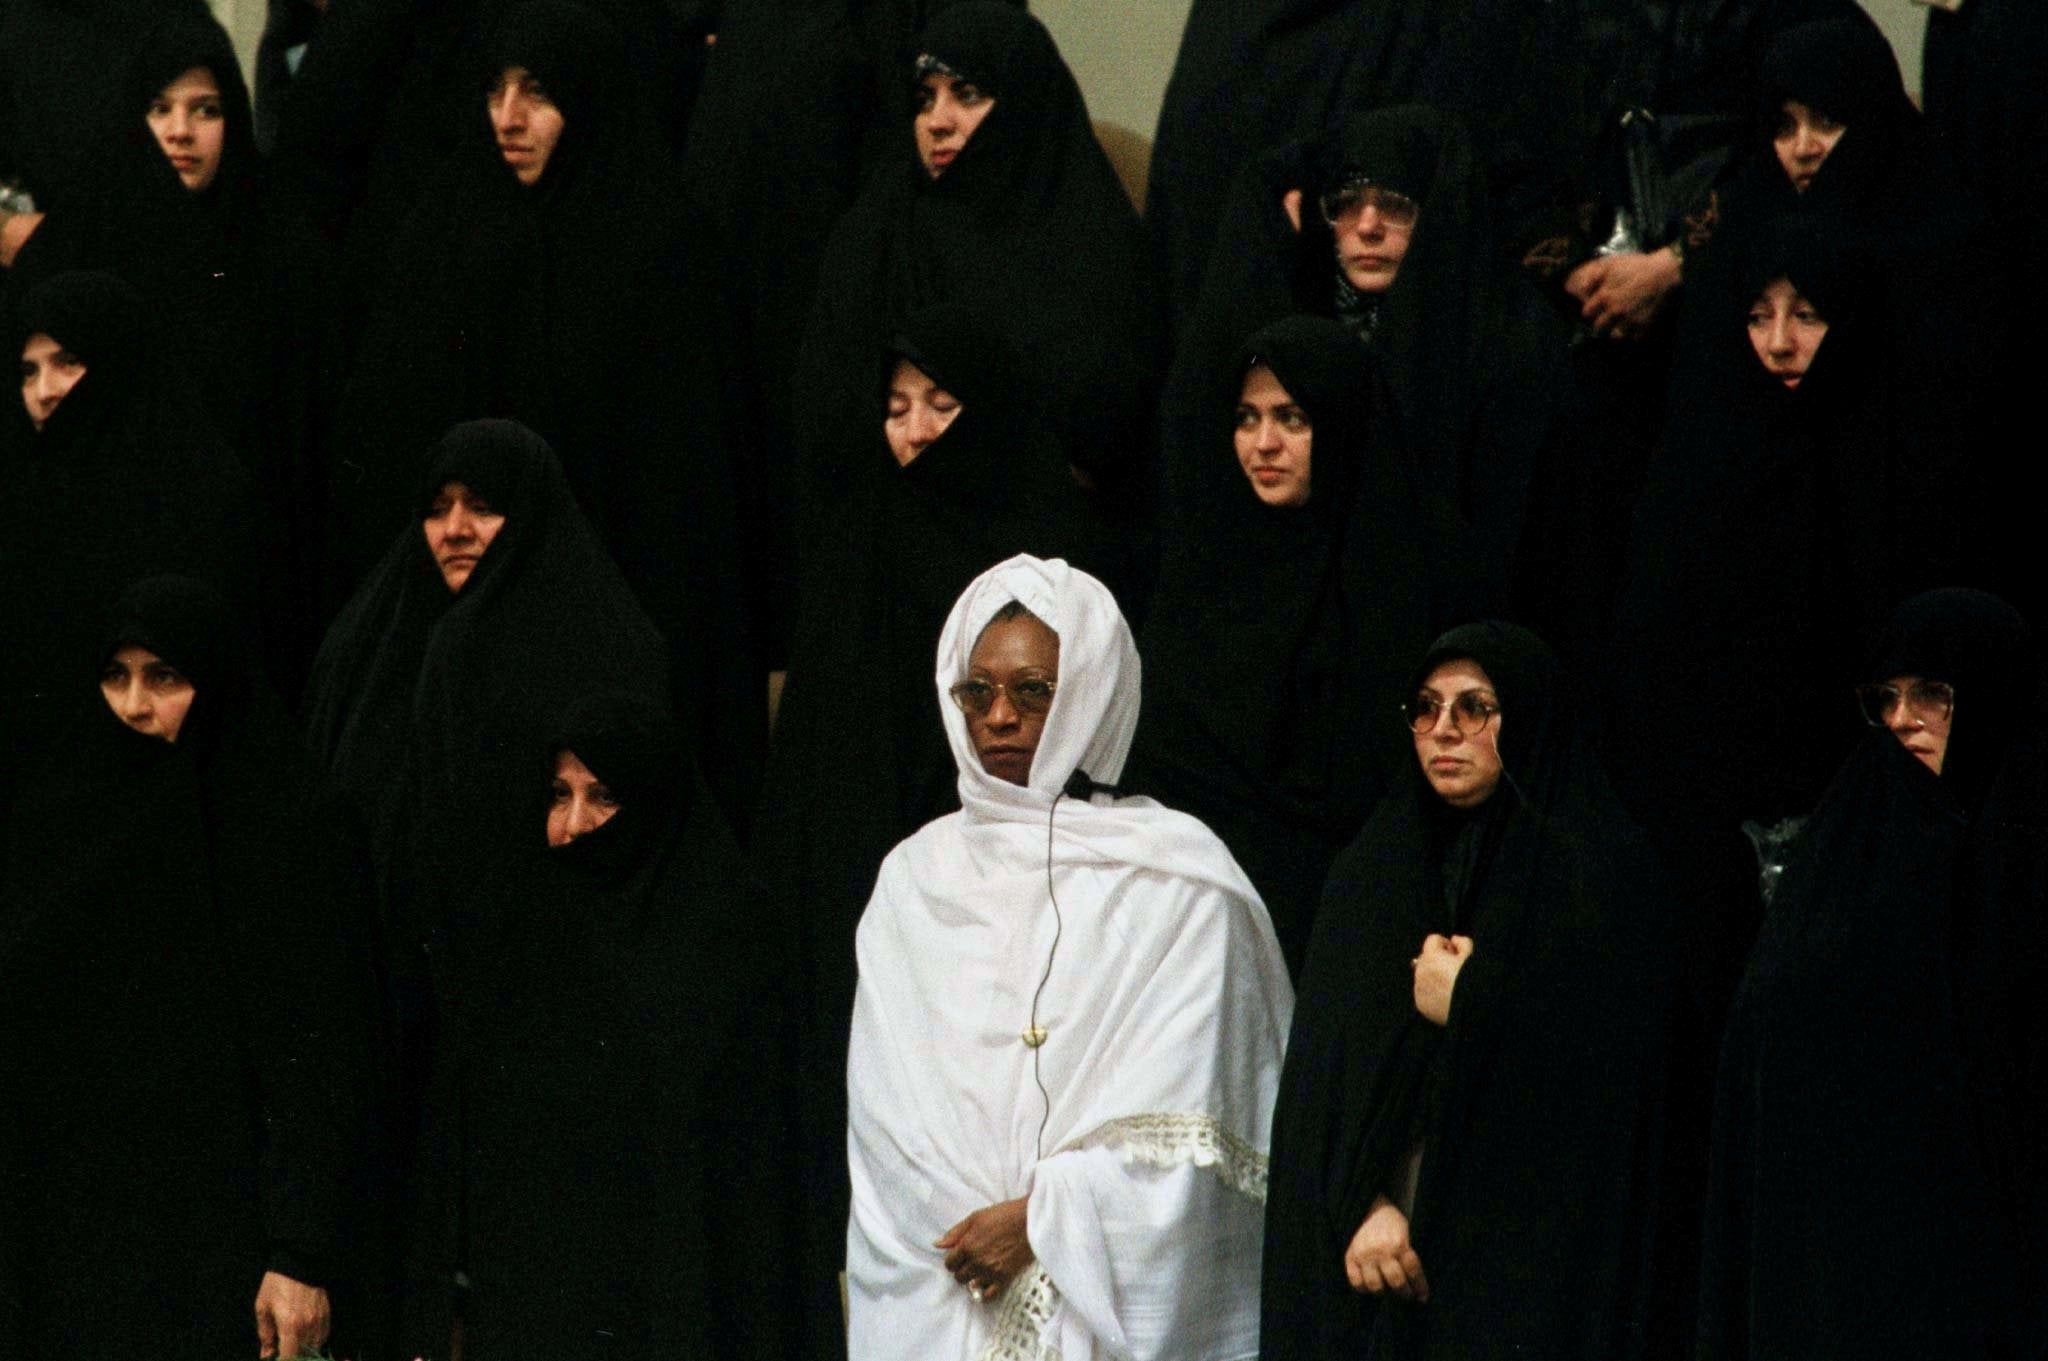 African delegate in white among hosts in Iran in 1997